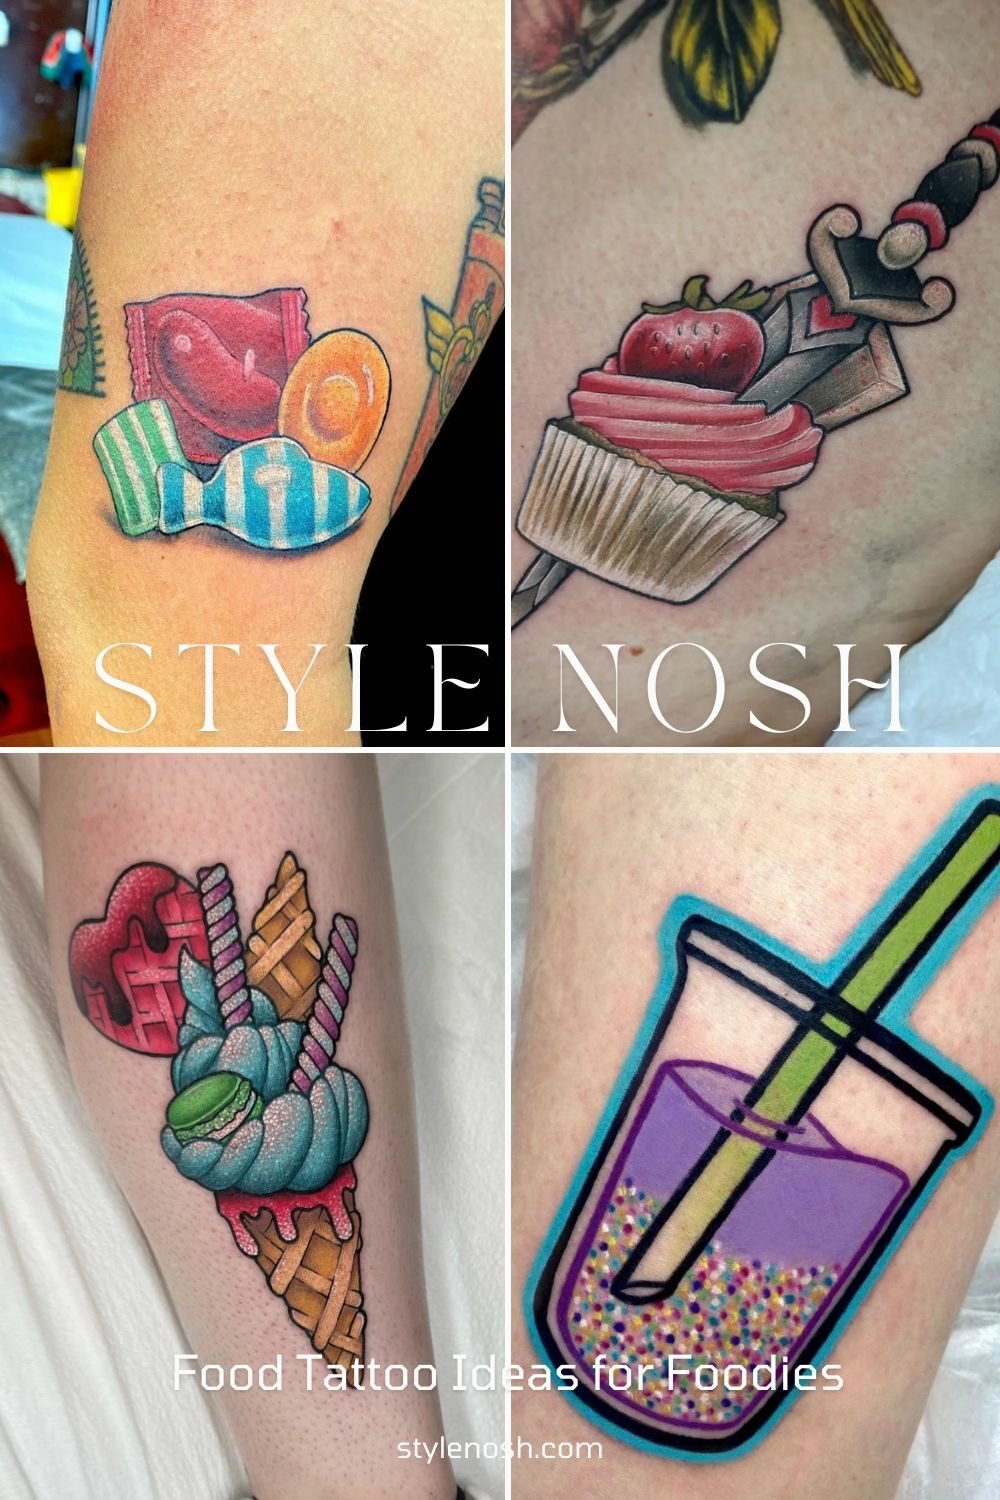 Get a sweet food tattoo if you enjoy baking especially cupcakes cakes and other desserts as well as icings and glazes